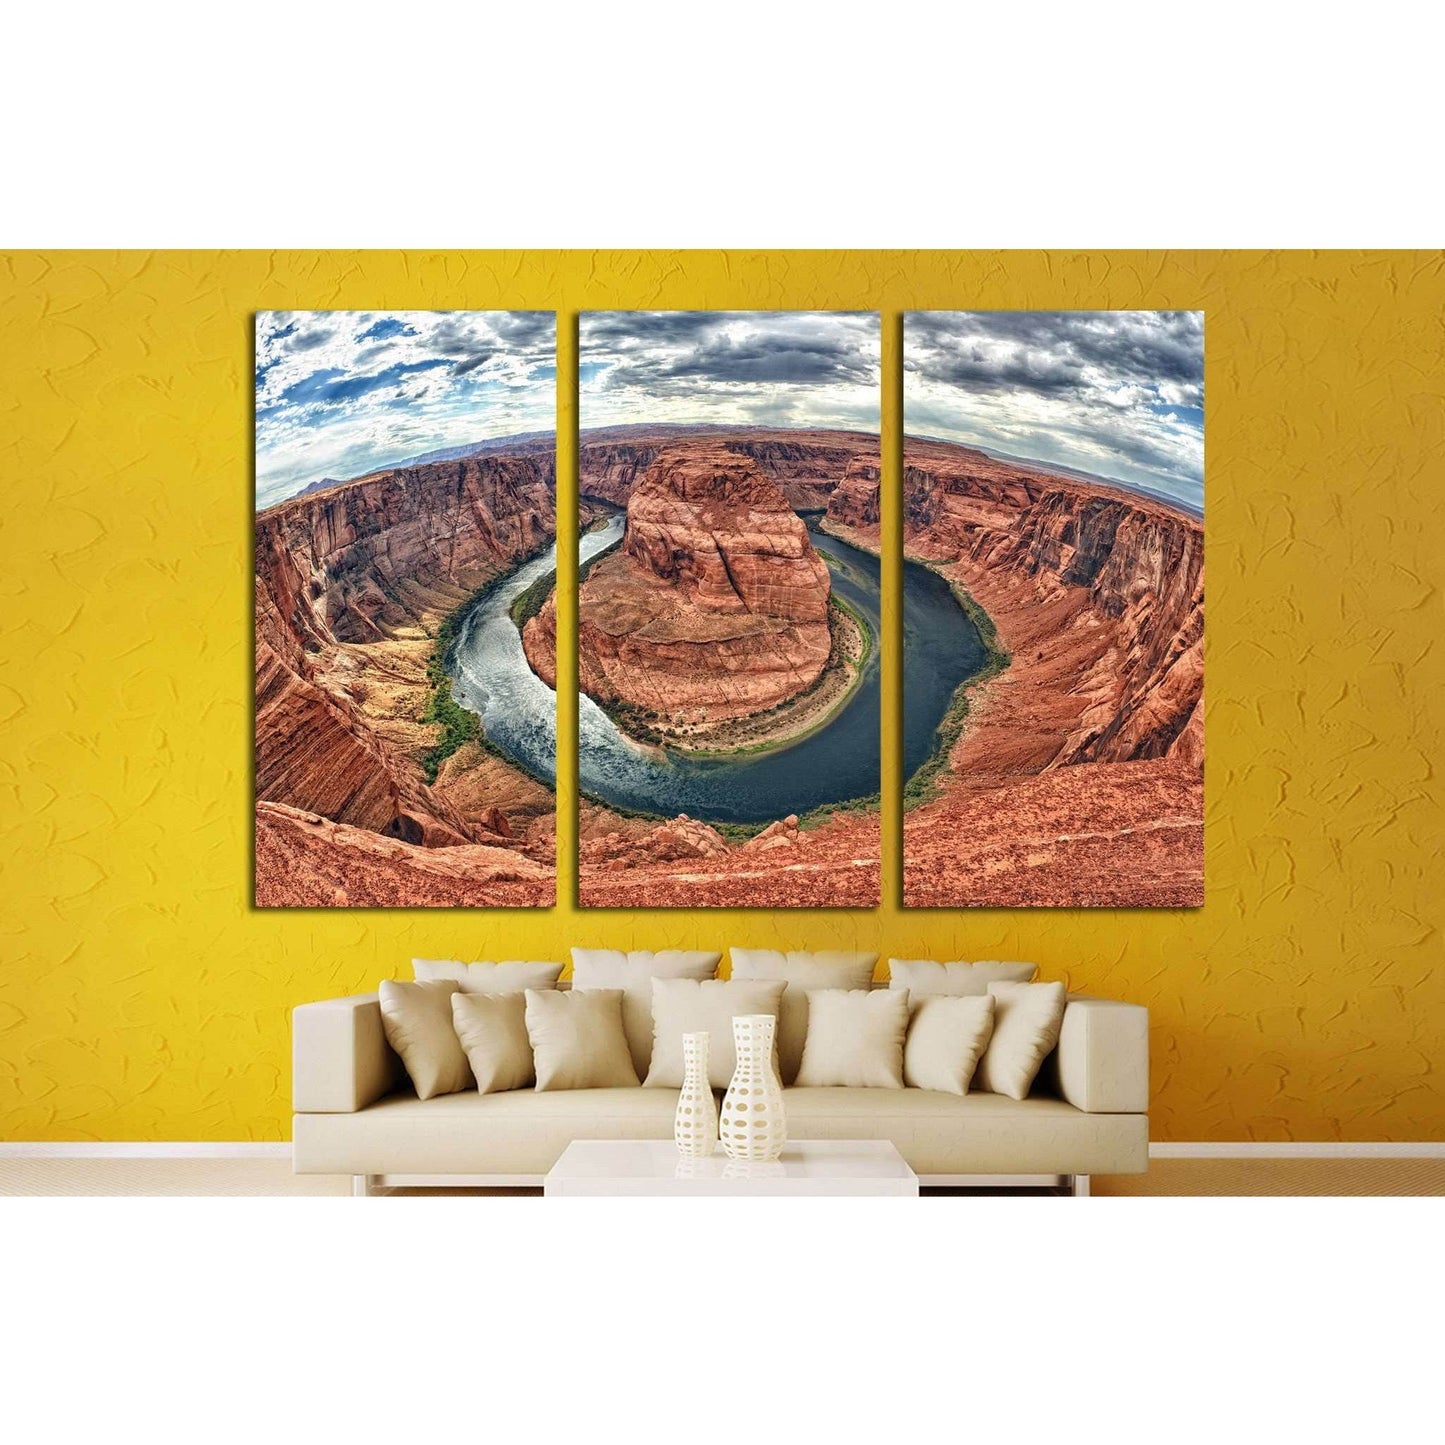 Horseshoe Bend River Canyon Multi-Panel Canvas PrintThis multi-panel canvas print features the iconic Horseshoe Bend, showcasing the natural meander of the Colorado River through rich, red canyon walls. It would serve as a stunning panoramic addition to s